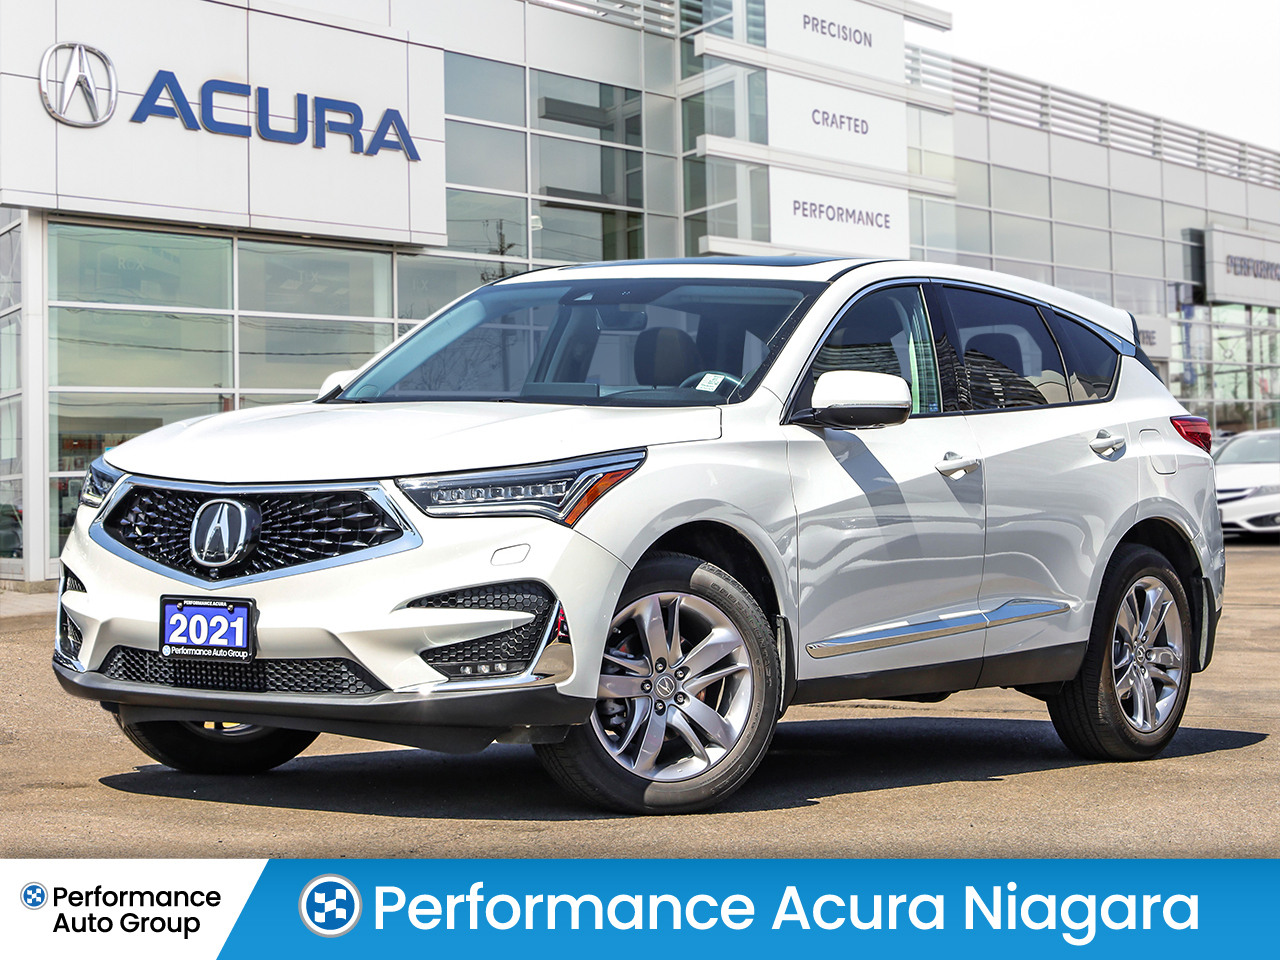 2021 Acura RDX SOLD - PENDING DELIVERY